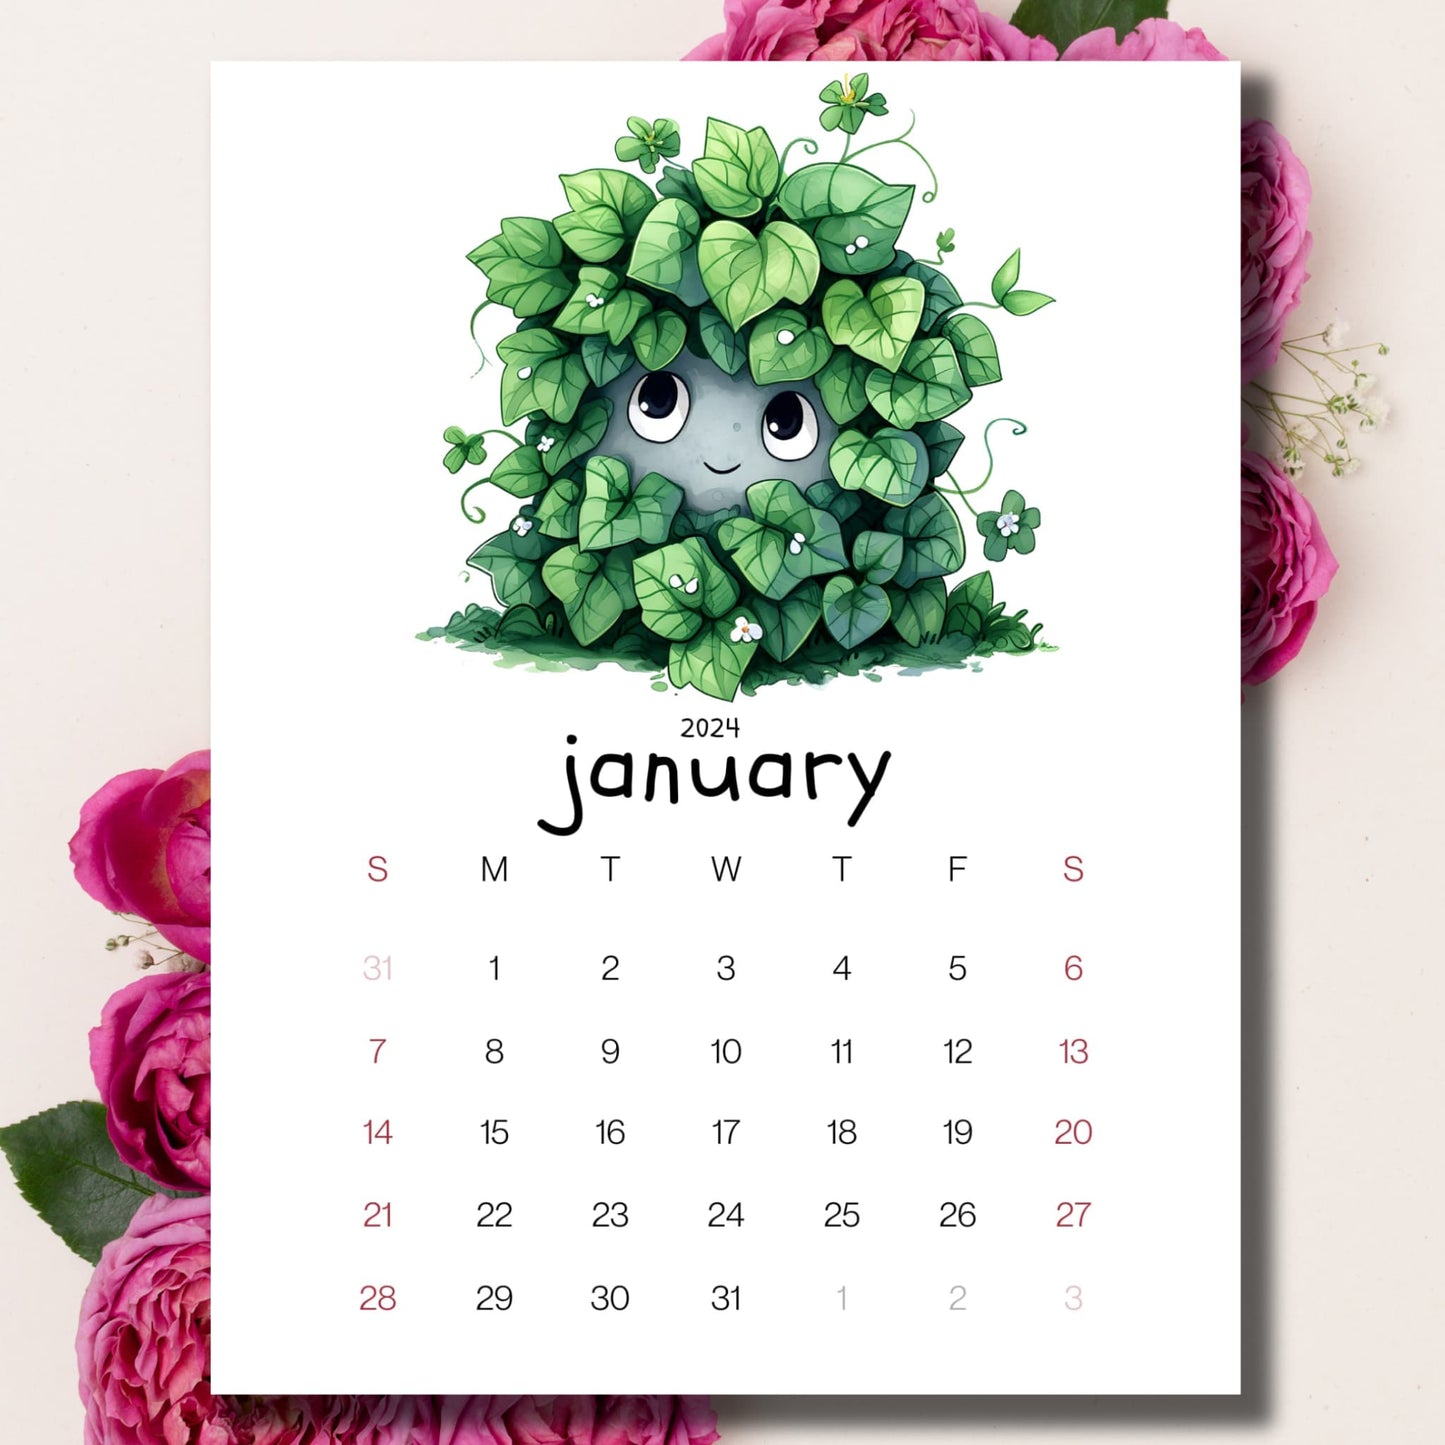 Ivy Intrigue January 2024 calendar on beige background with pink peonies.